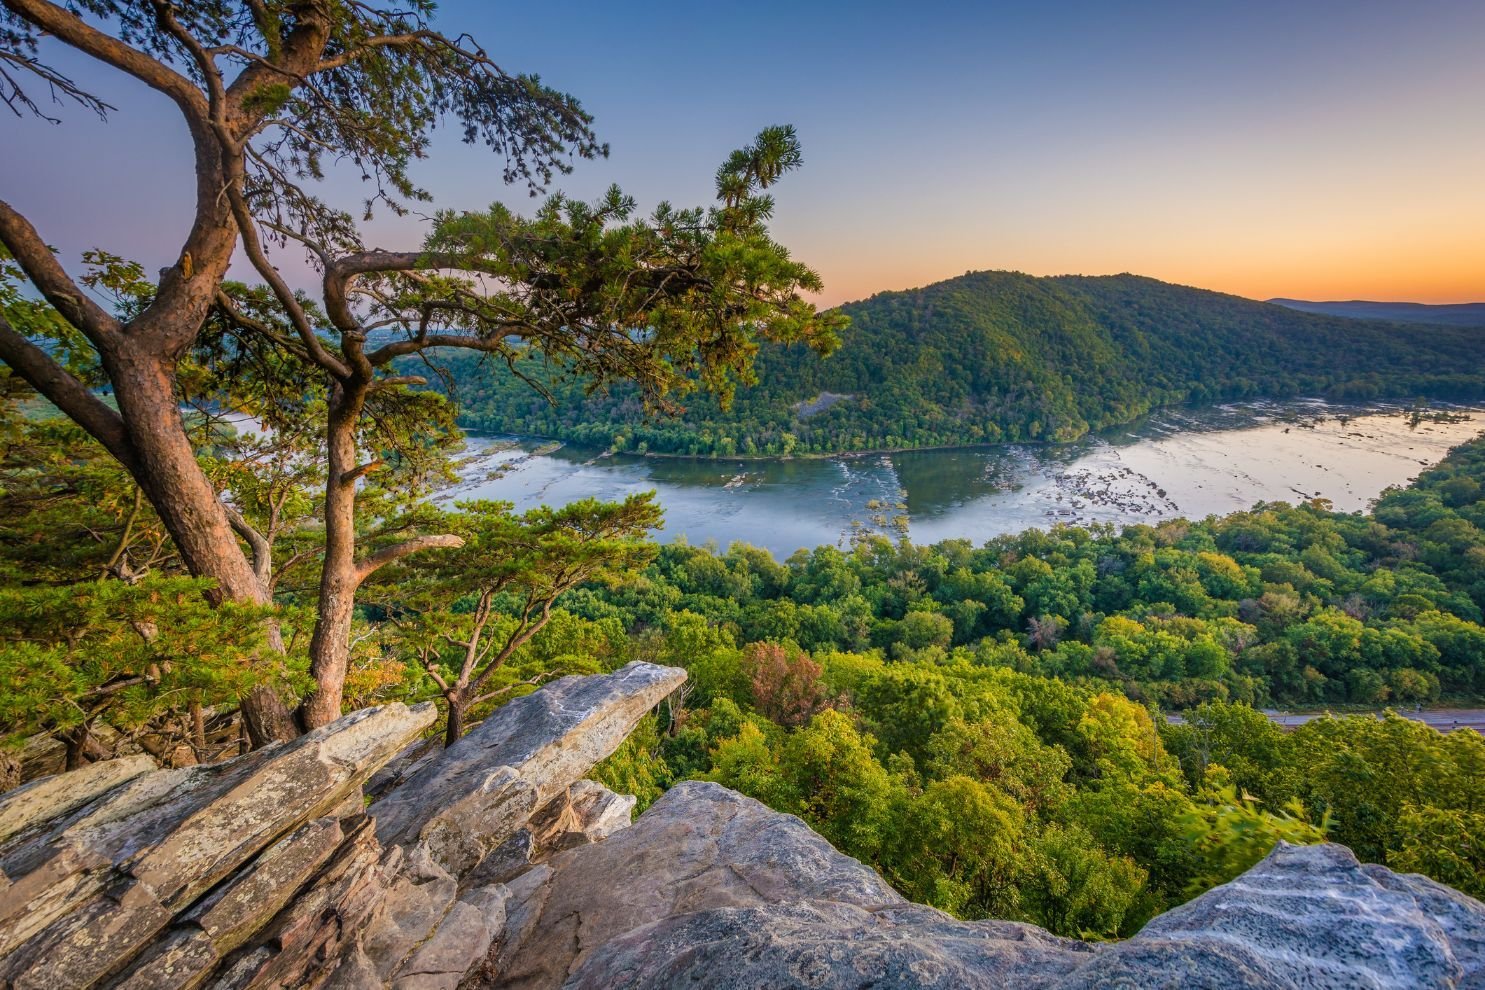 The view of the Potomac River from the Weverton Cliffs. Photo: Getty